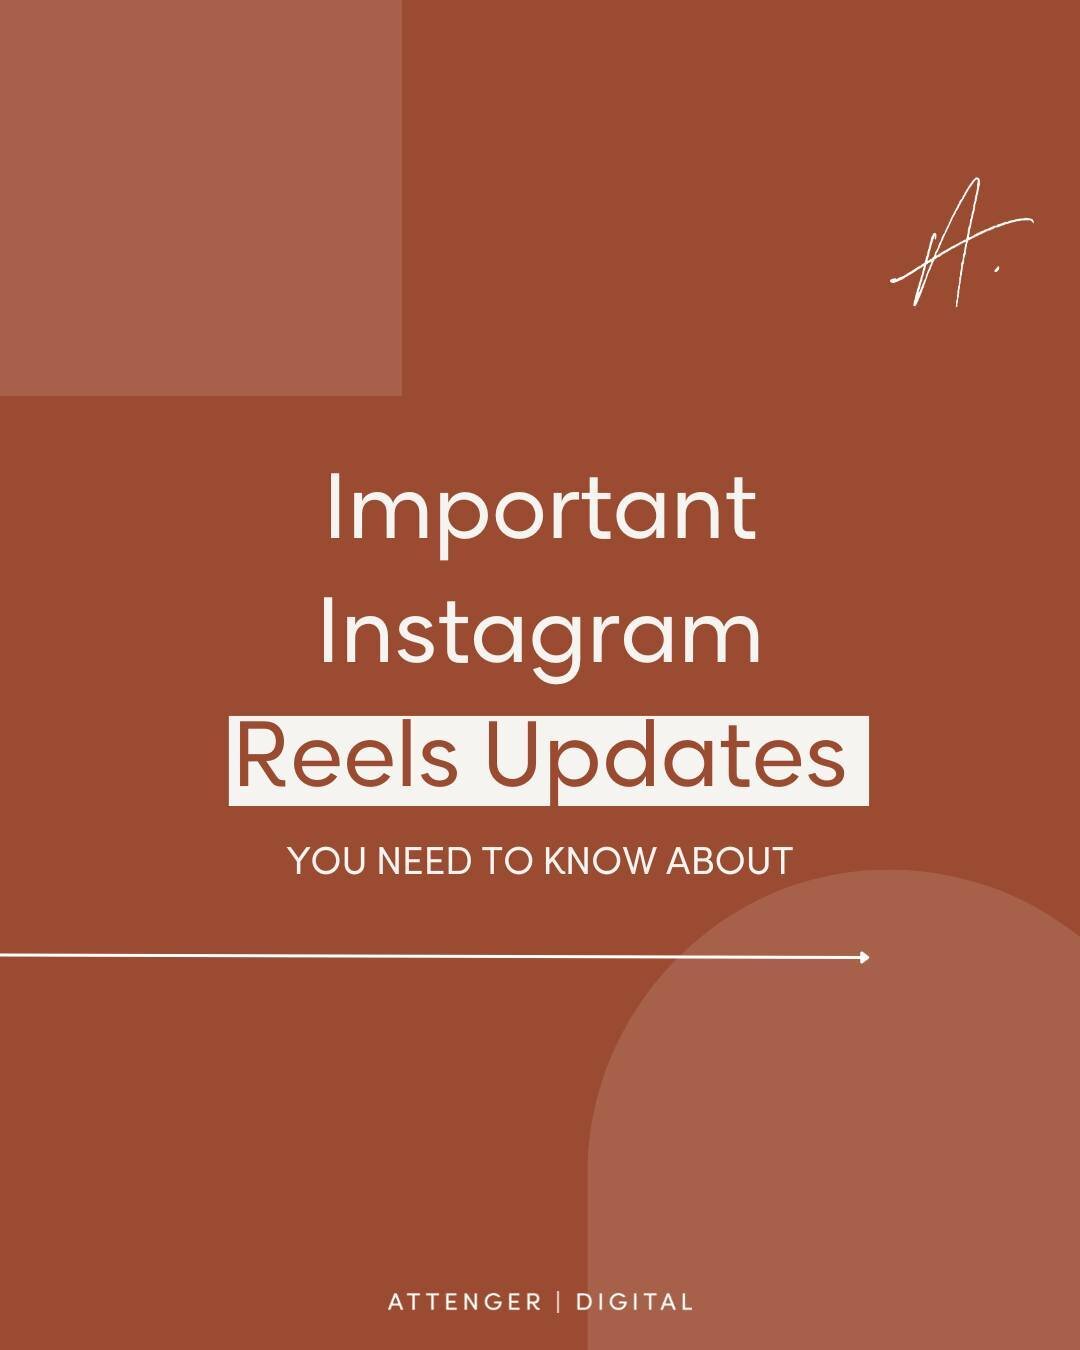 👉🏽 Coming soon to Instagram reels! 🚨⁠
⁠
Instagram CEO @mosseri recently announced some big reels updates that you should keep an eye out for! These updates will make editing reels easier and help you keep on top of what's trending and how your ree